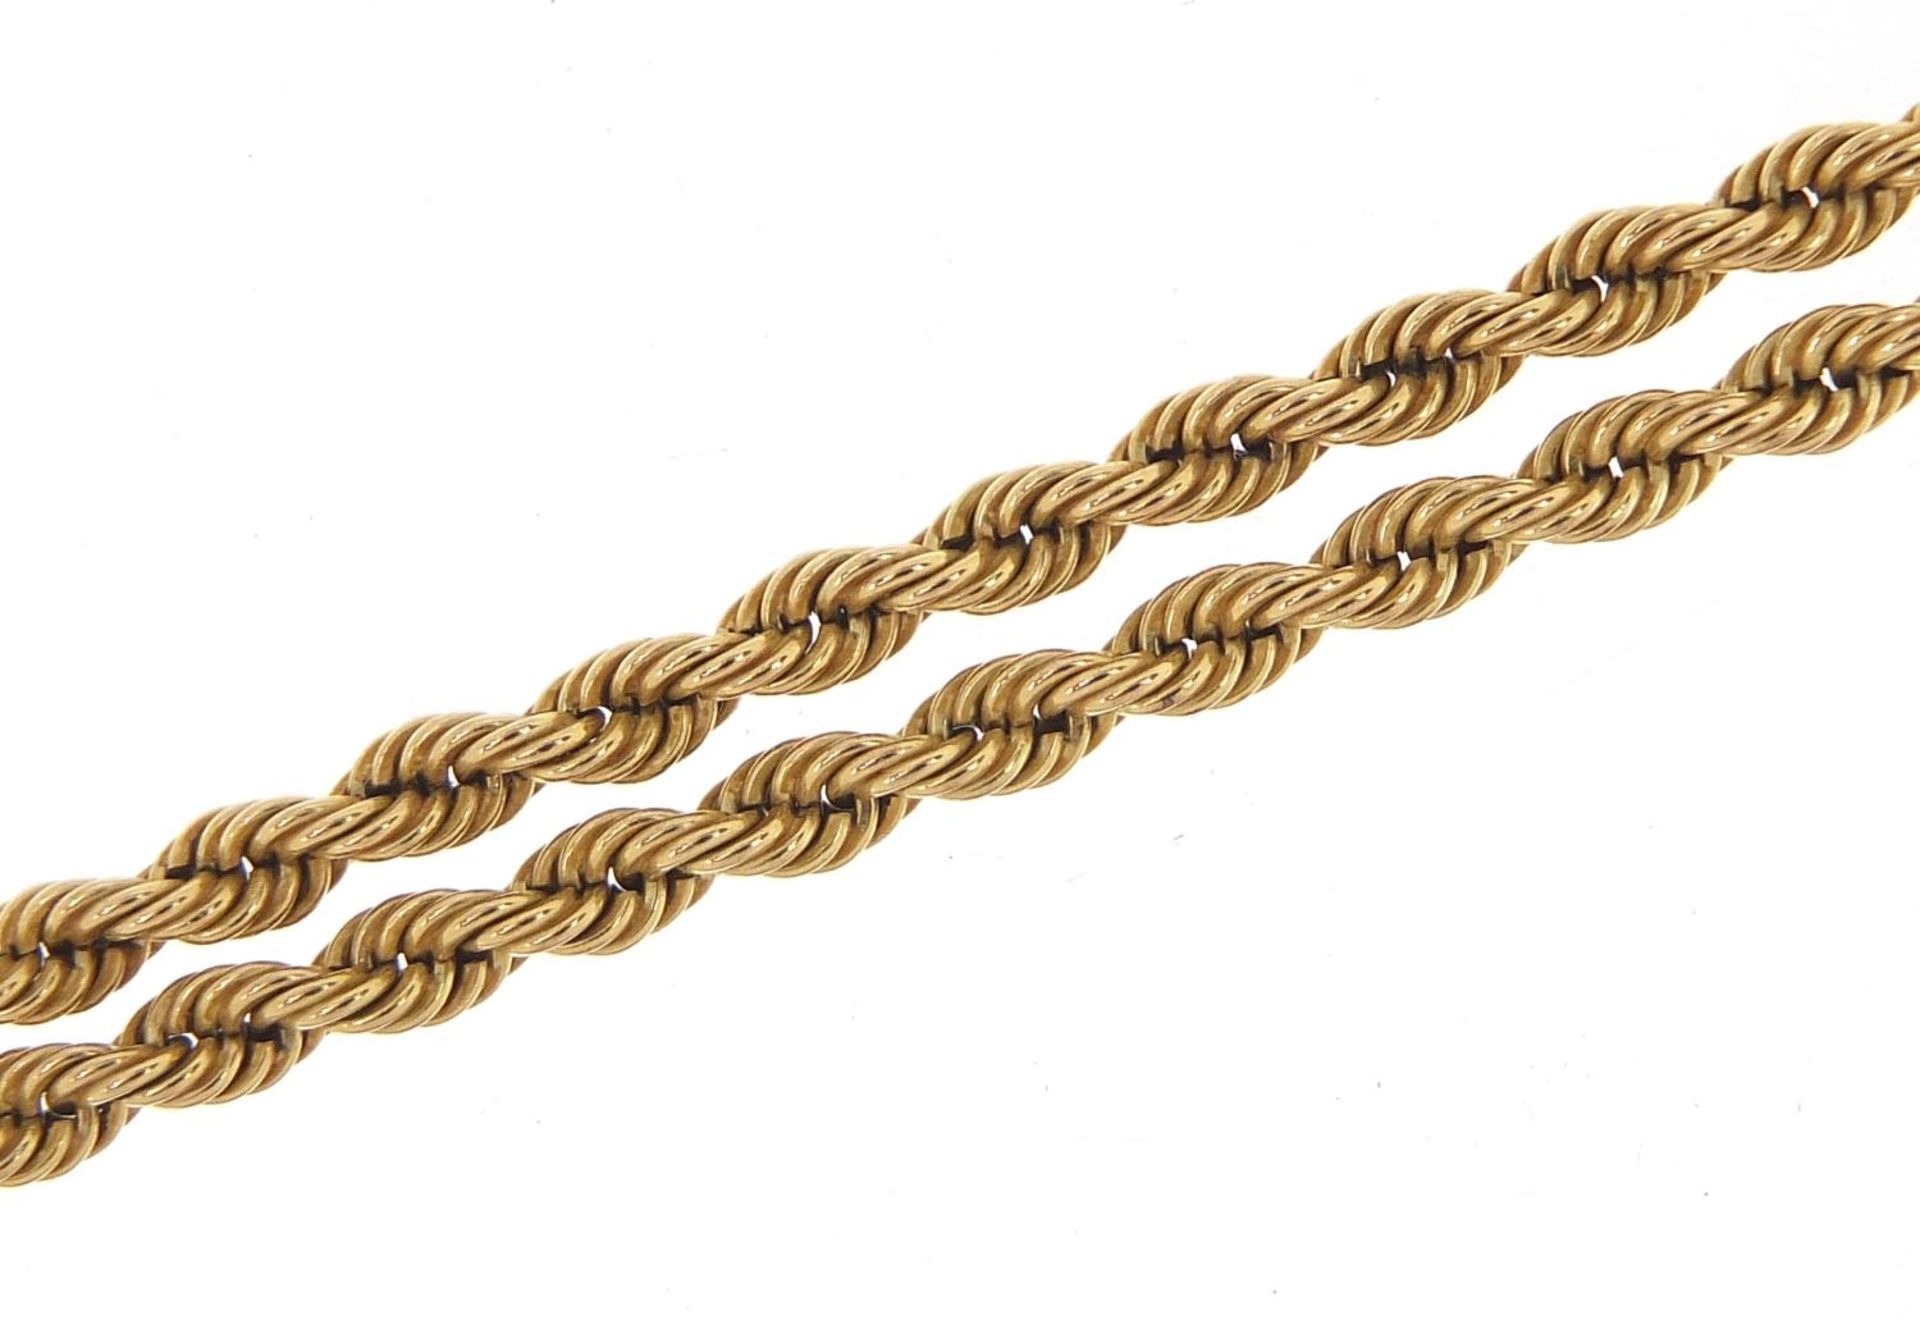 9ct gold rope twist necklace 40cm in length, 4.6g